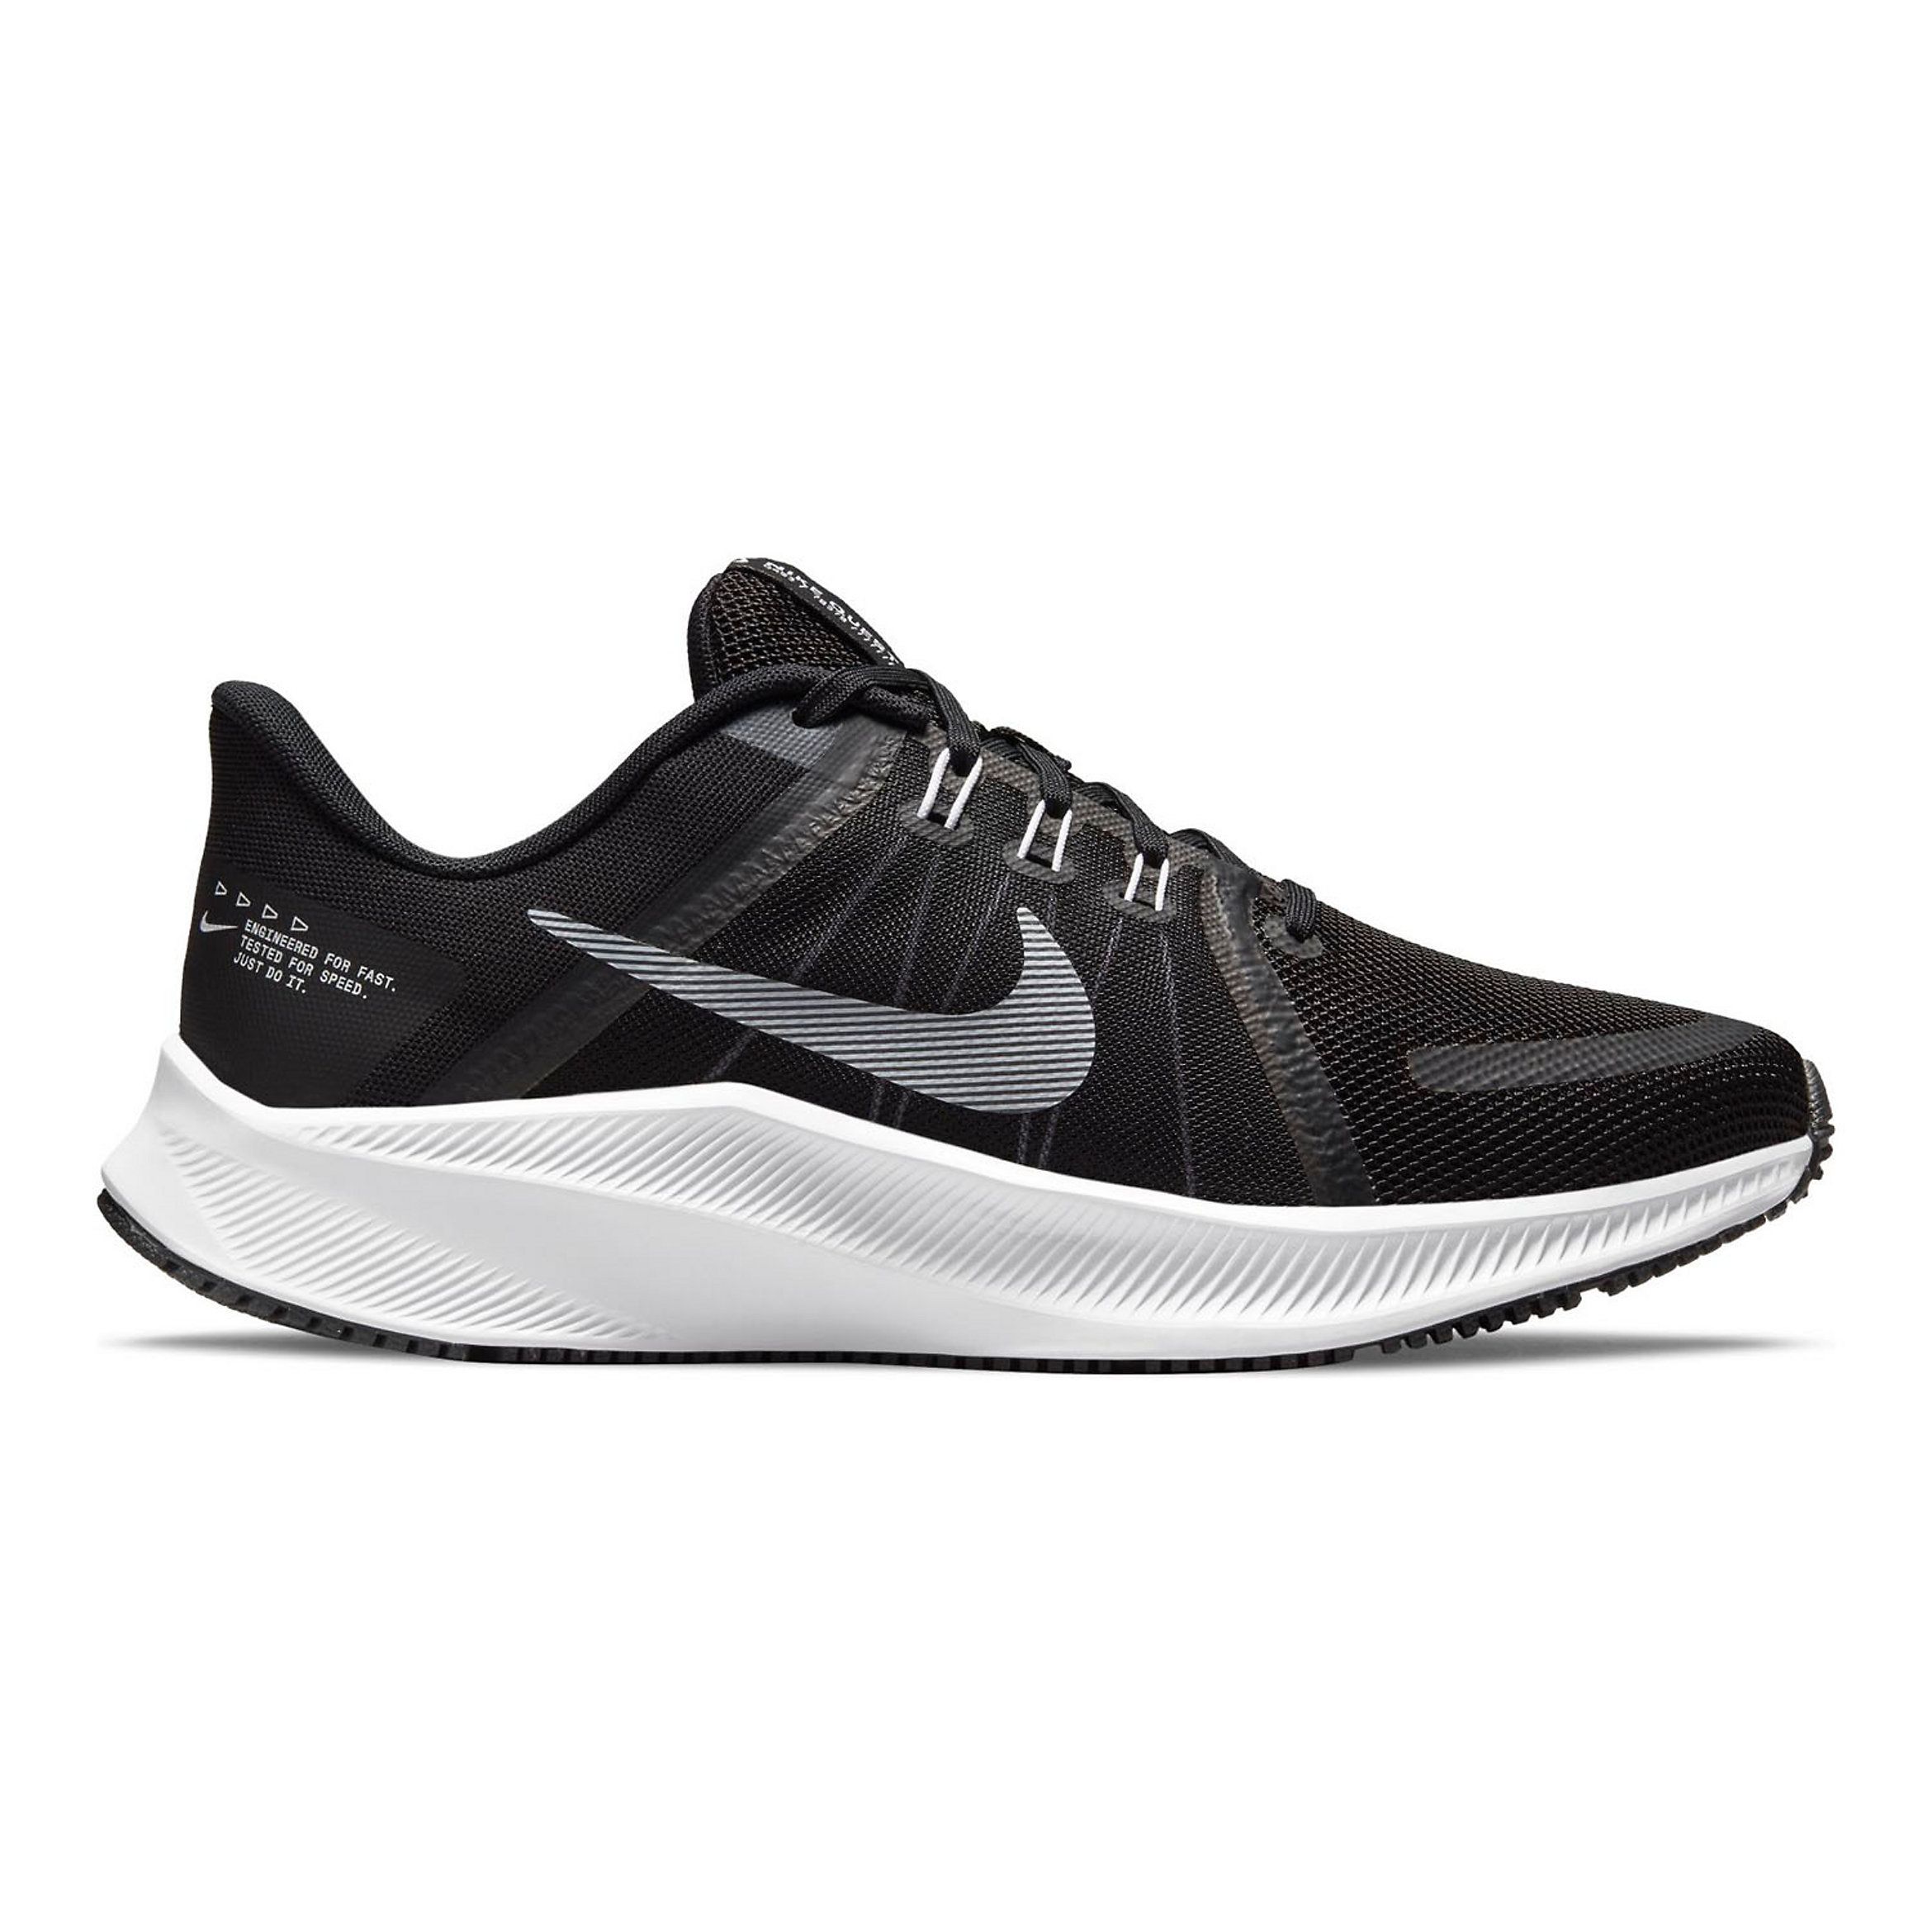 Nike Quest 4 Women's Running Shoes | Kohl's